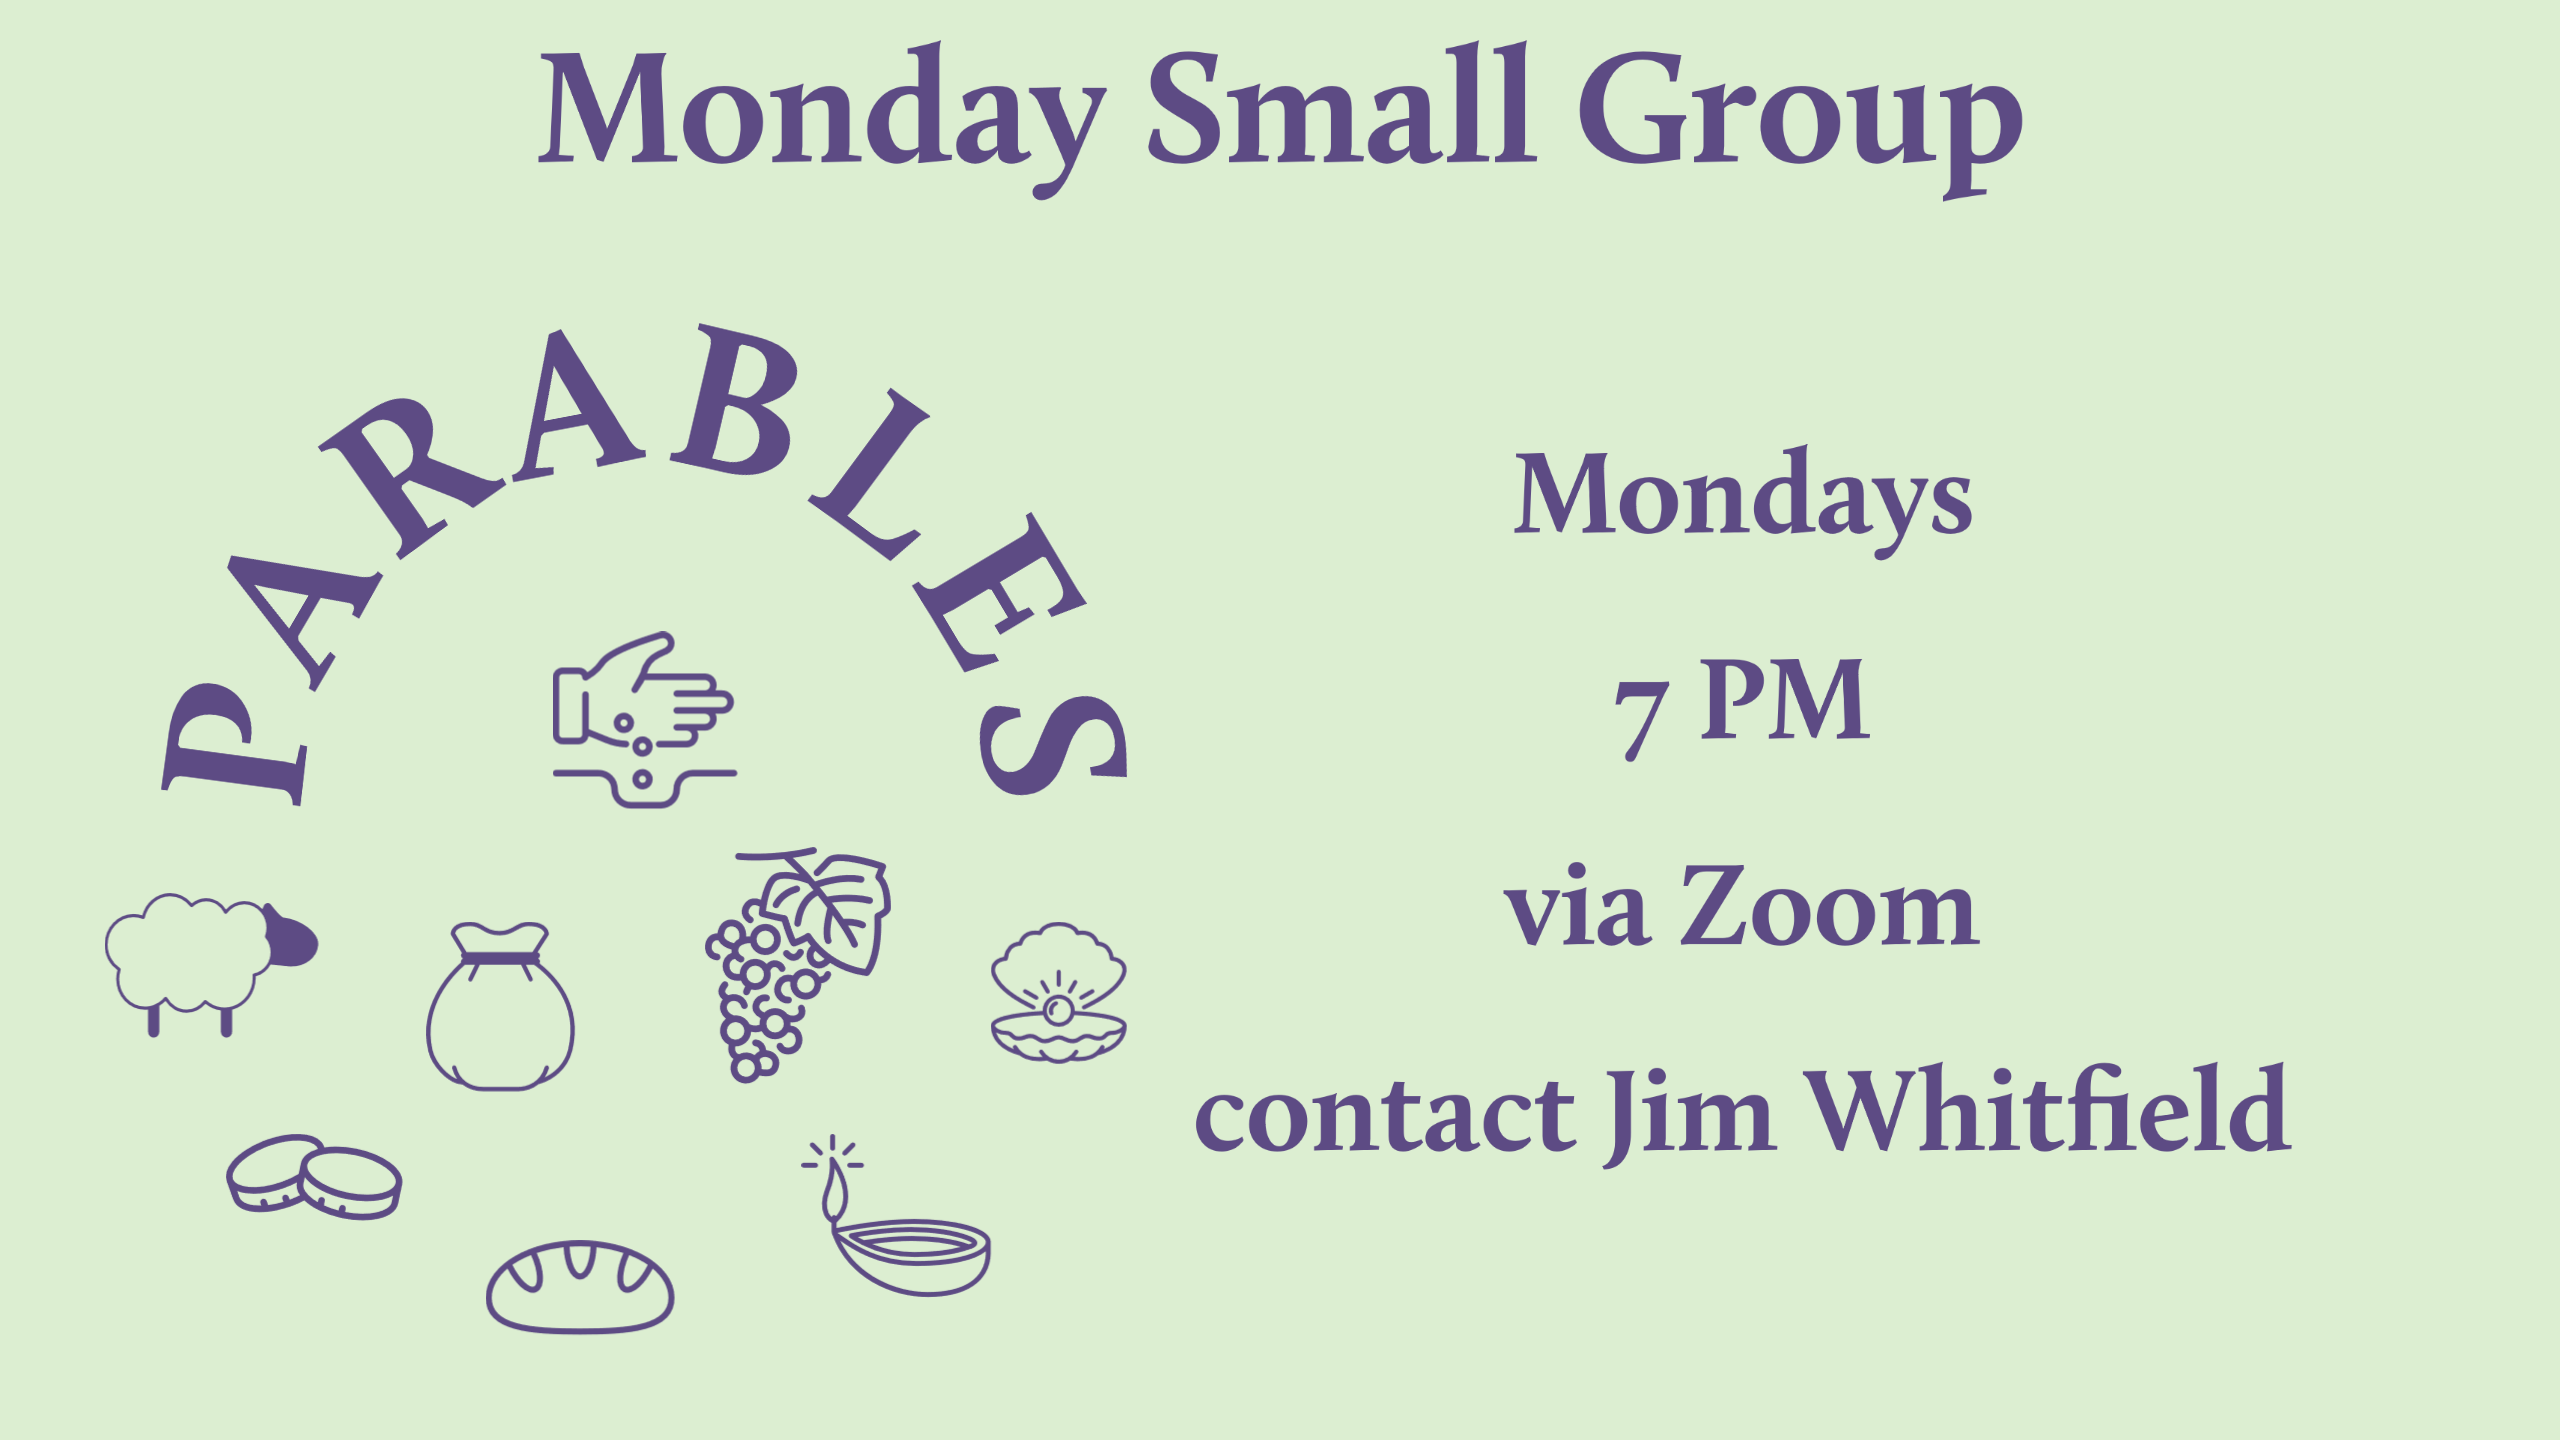 purple text on a green background reading "Monday Small Group Parables Mondays 7 PM via Zoom Contact Jim Whitfield" with icons of a hand planting seeds, a sheep, coins, a bag of money, grapes, a loaf of bread, an oyster with a pearl, and a lit oil lamp